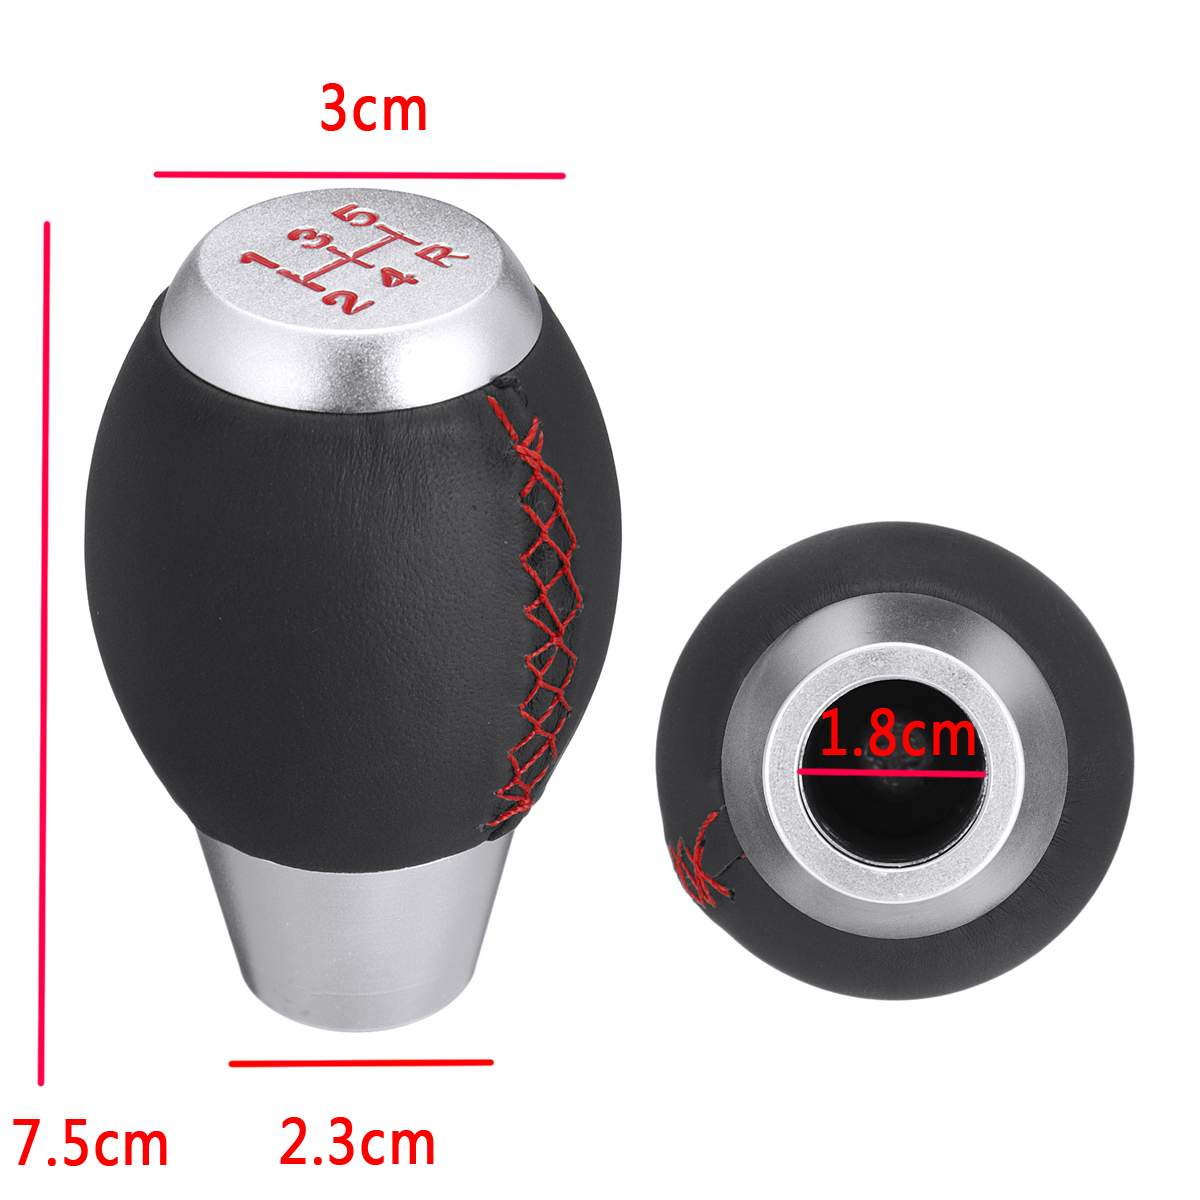 5 Speeds Leather Gear Stick Shift Knob Shifter + Gear Shift Knob Shifter Boot Cover Universal For Honda for Civic Si 5 Speeds